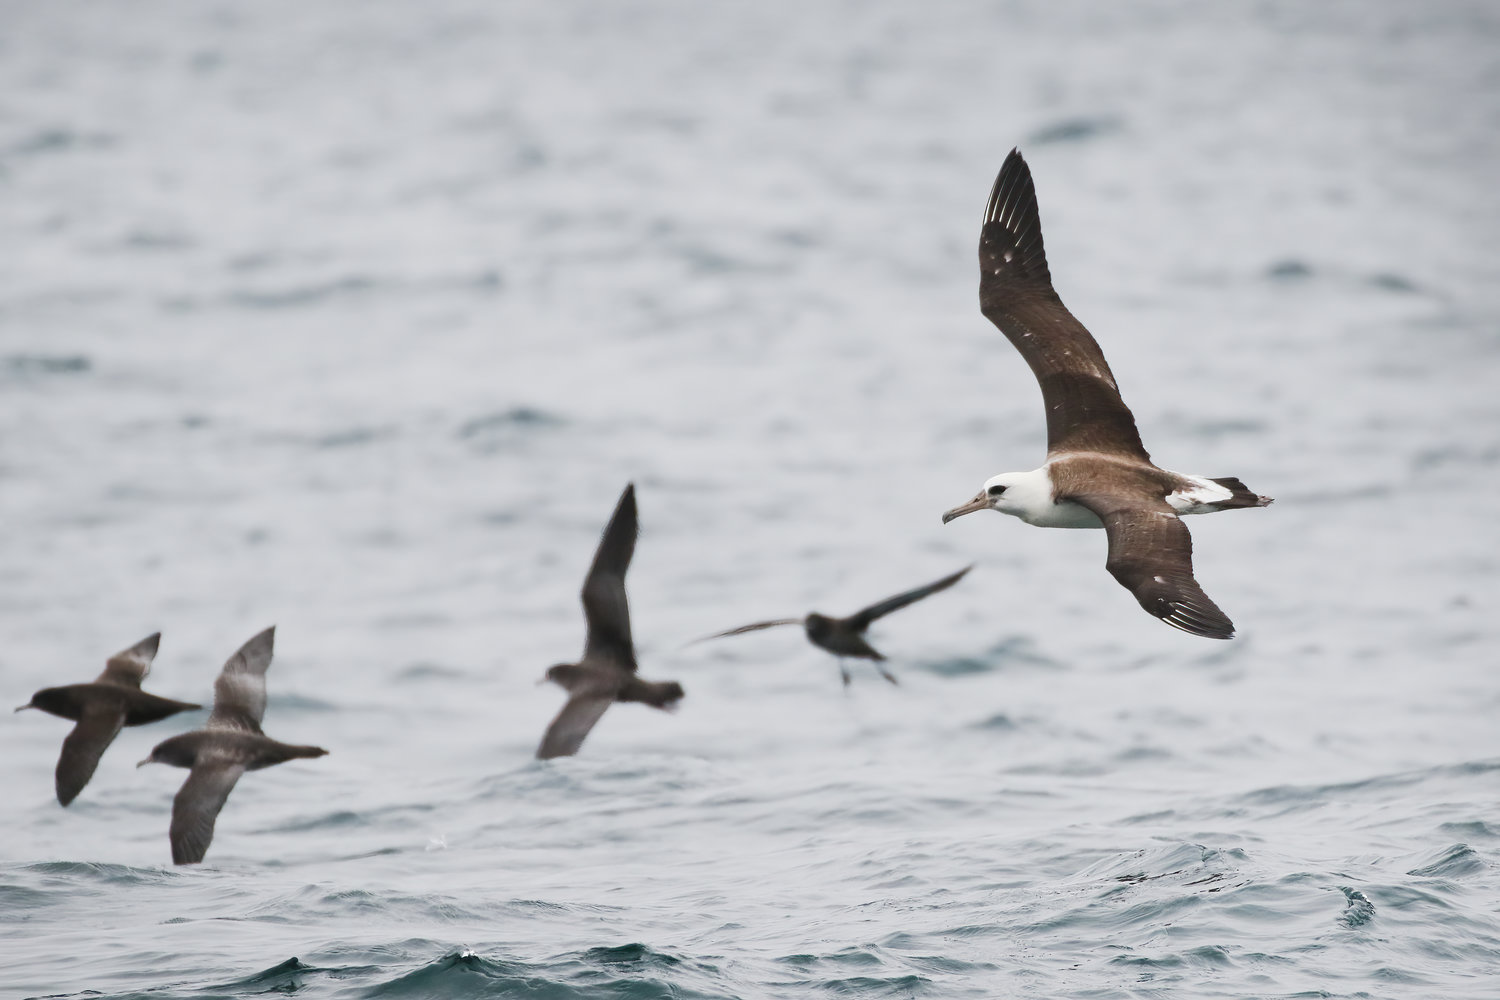 A Laysan albatross in the foreground (Phoebastria immutabilis) flying with sooty shearwater (Ardenna grisea).